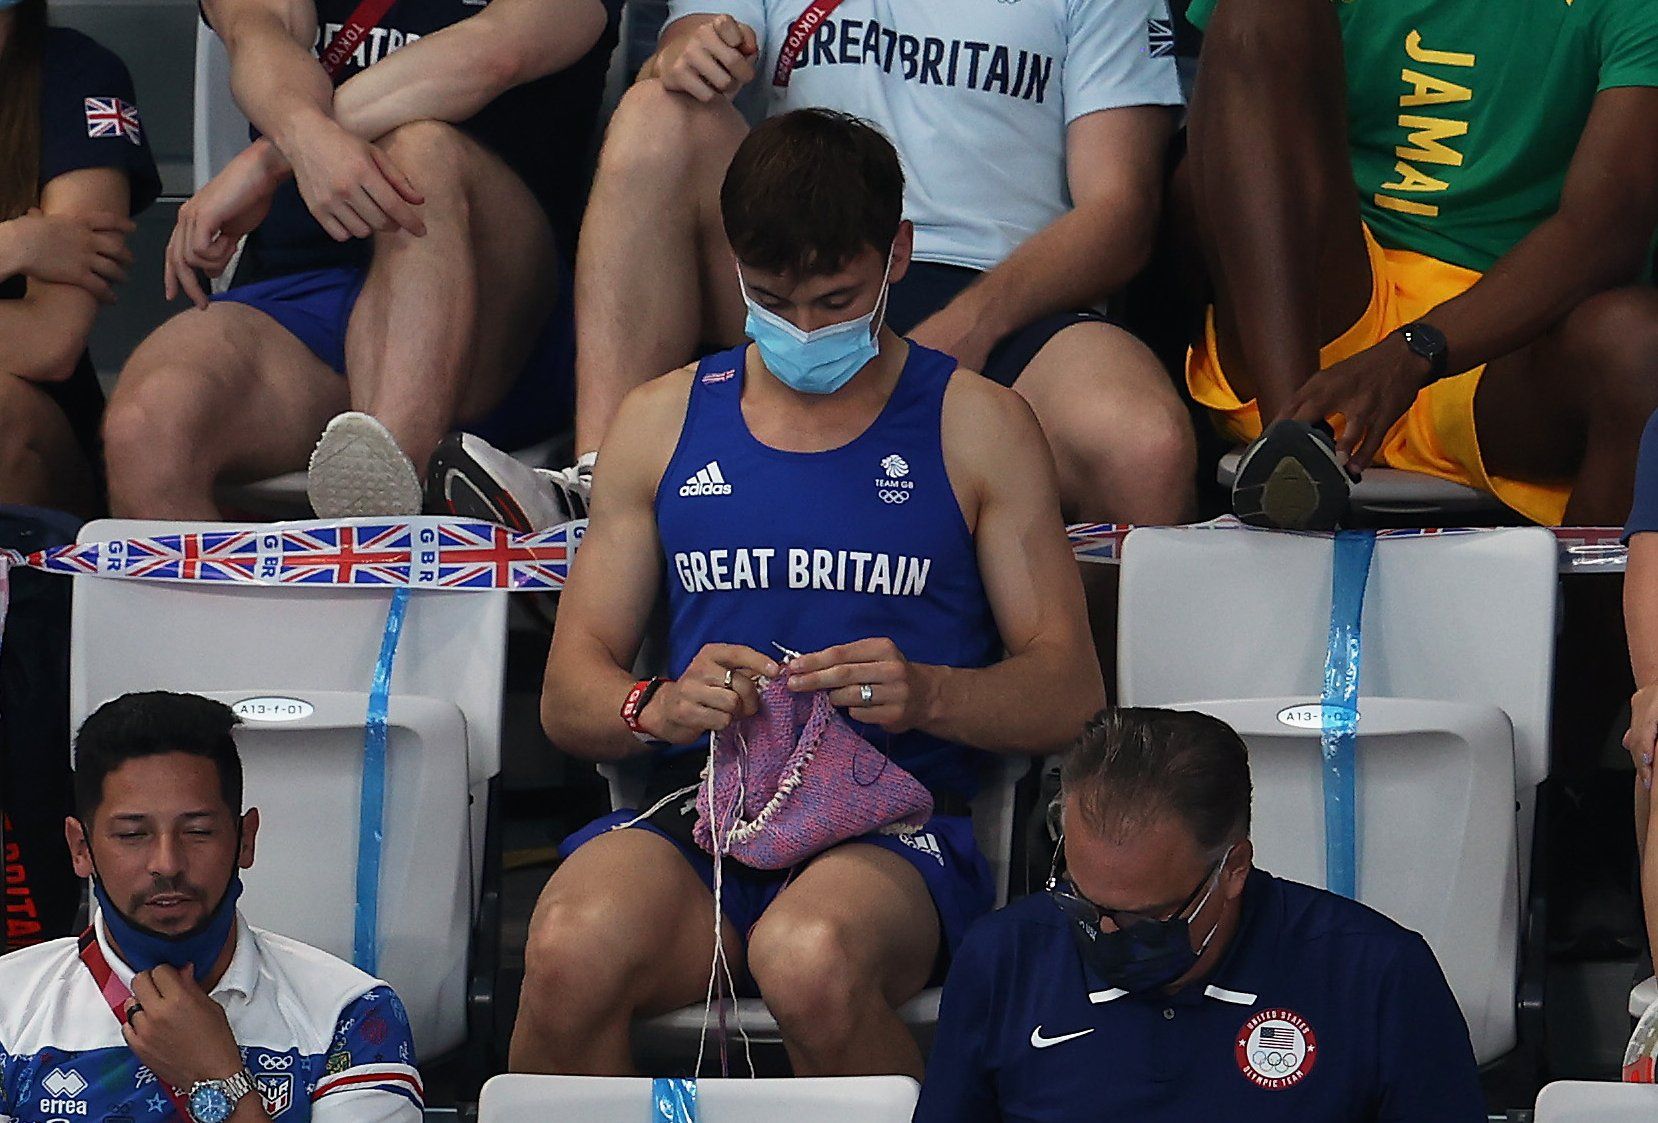 British diver Tom Daley gets his knitting needles out, yet again